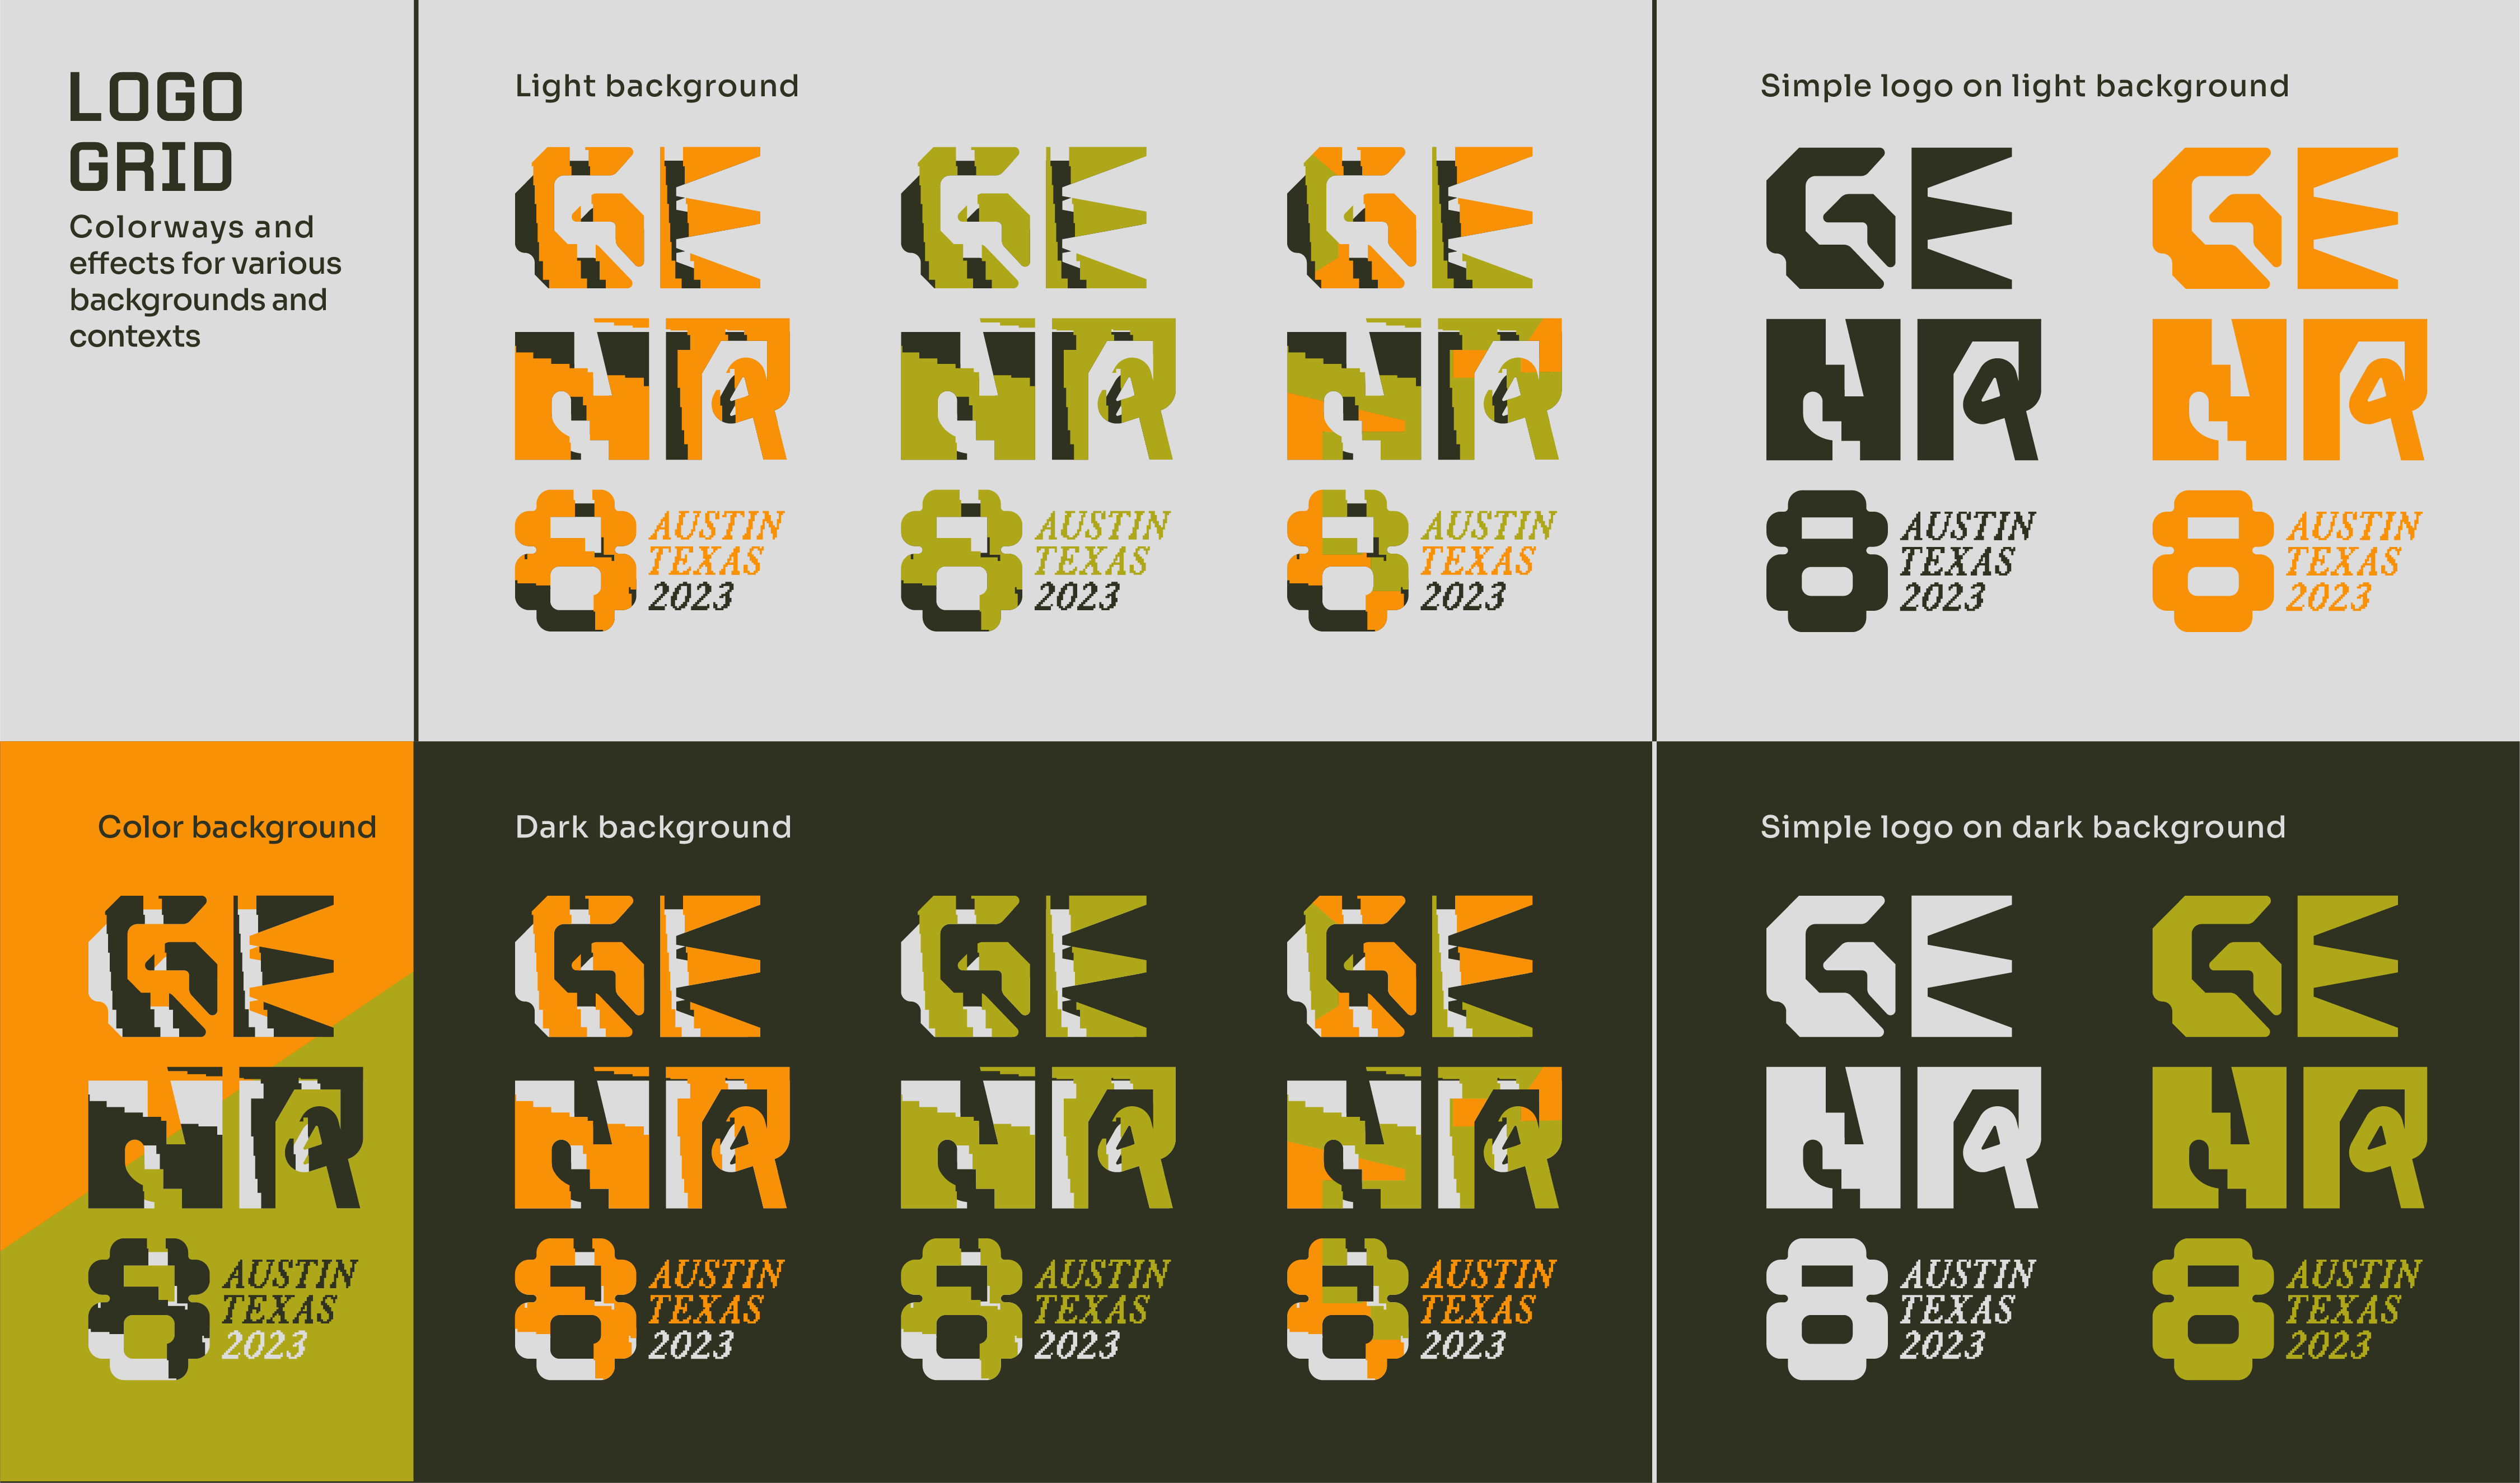 "Logo Grid- colorways and effects for various backgrounds and contexts". The top section shows logos set on a light background, the bottom shows the logos set on color and black background.